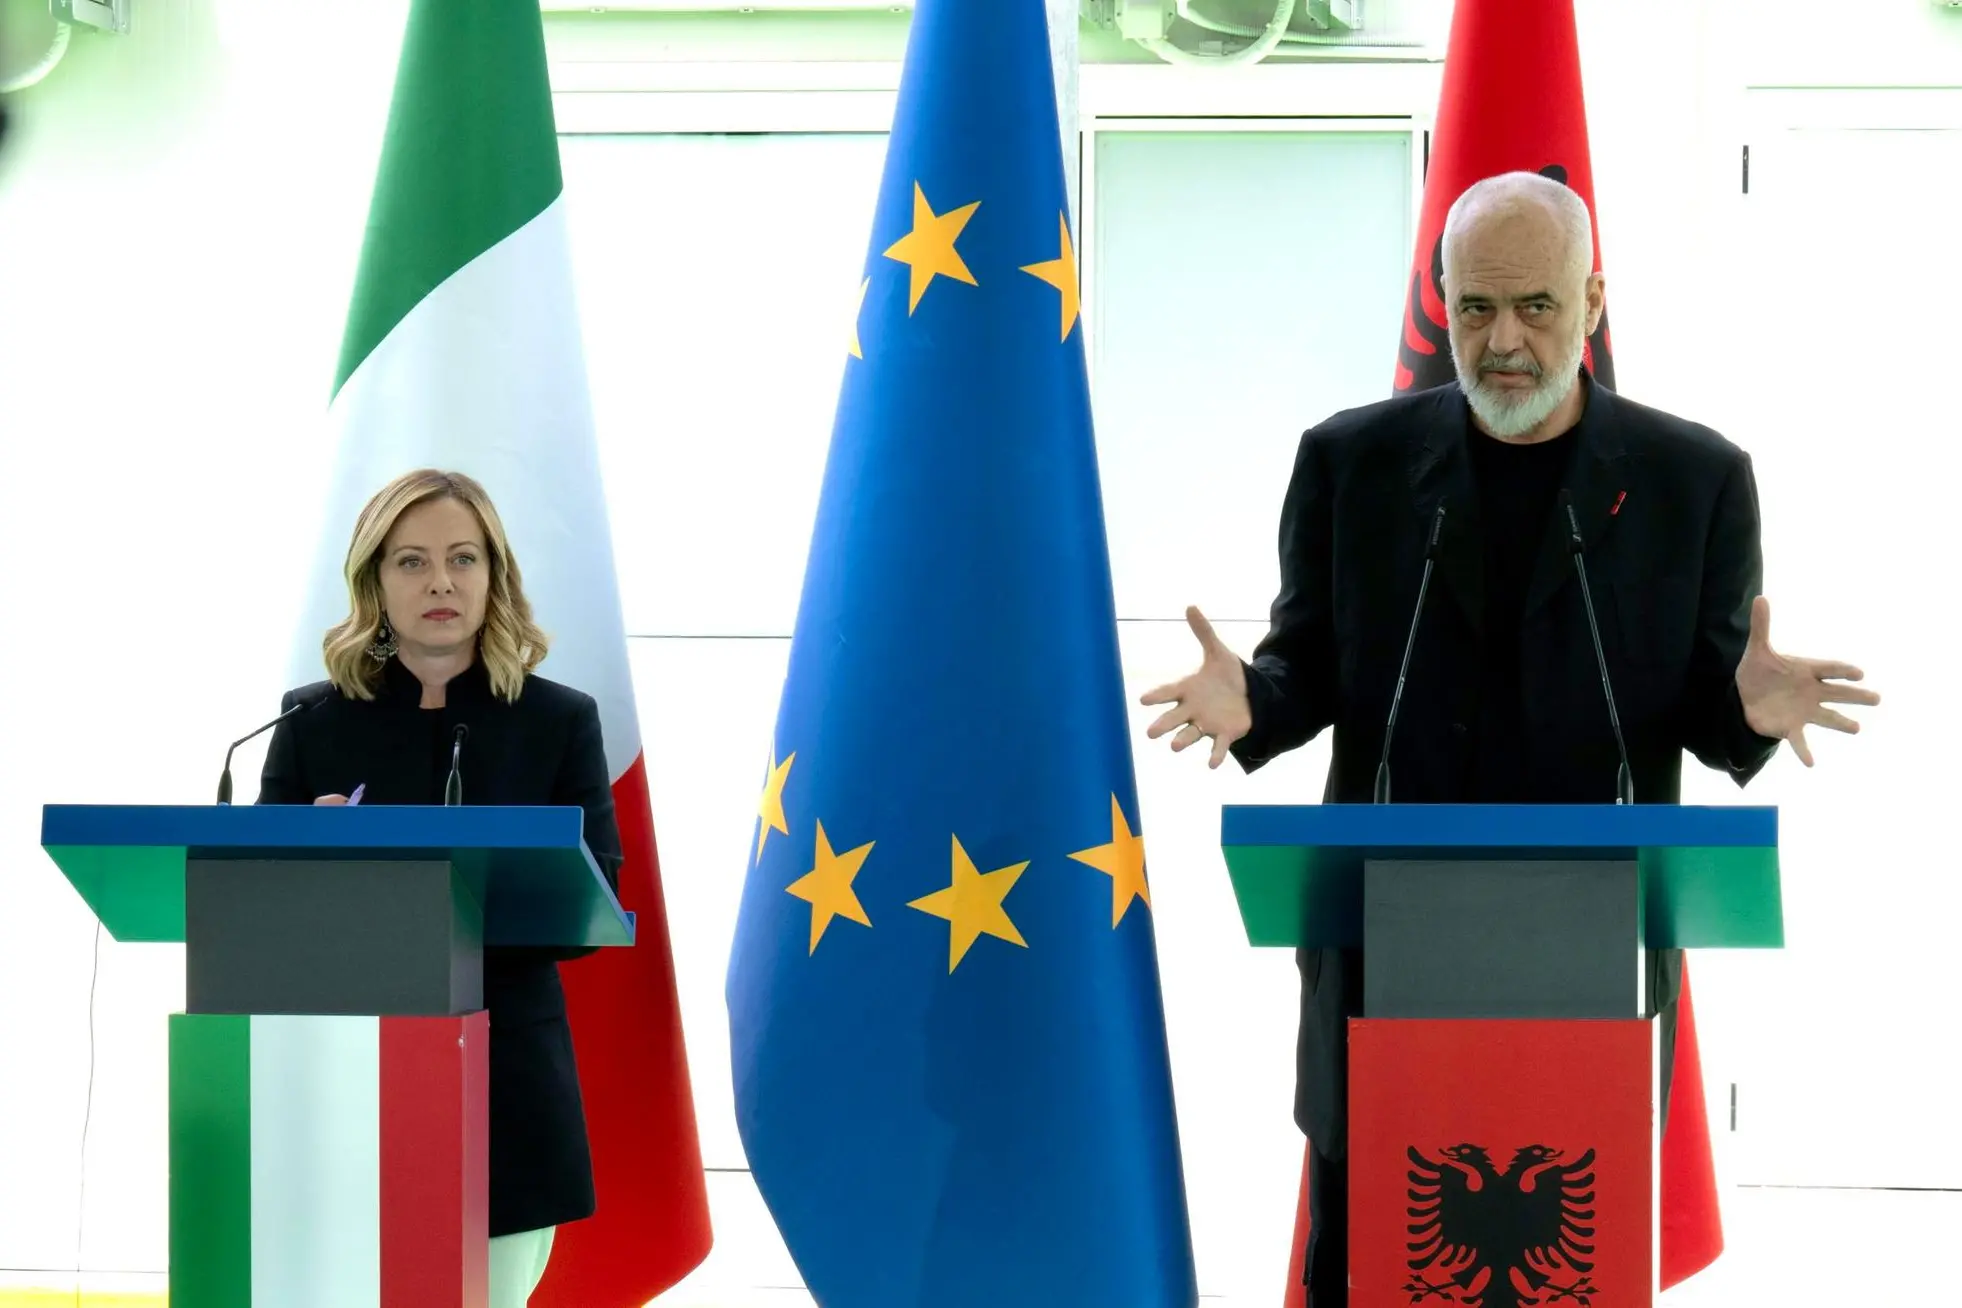 epa11391235 Italian Prime Minister Giorgia Meloni (L) attends a joint press conference with Albanian Prime Minister Edi Rama (R), after their visit to the migrant hotspot in Shengjin, Albania, 05 June 2024. The Italian and Albanian prime ministers visited the new Shengjin migrant hotspot, a center created on the basis of an agreement between Tirana and Rome to operate centres for asylum seekers on Albanian territory. EPA/FIIPPO ATTILI / CHIGI PALACE PRESS OFFICE HANDOUT HANDOUT EDITORIAL USE ONLY/NO SALES HANDOUT EDITORIAL USE ONLY/NO SALES